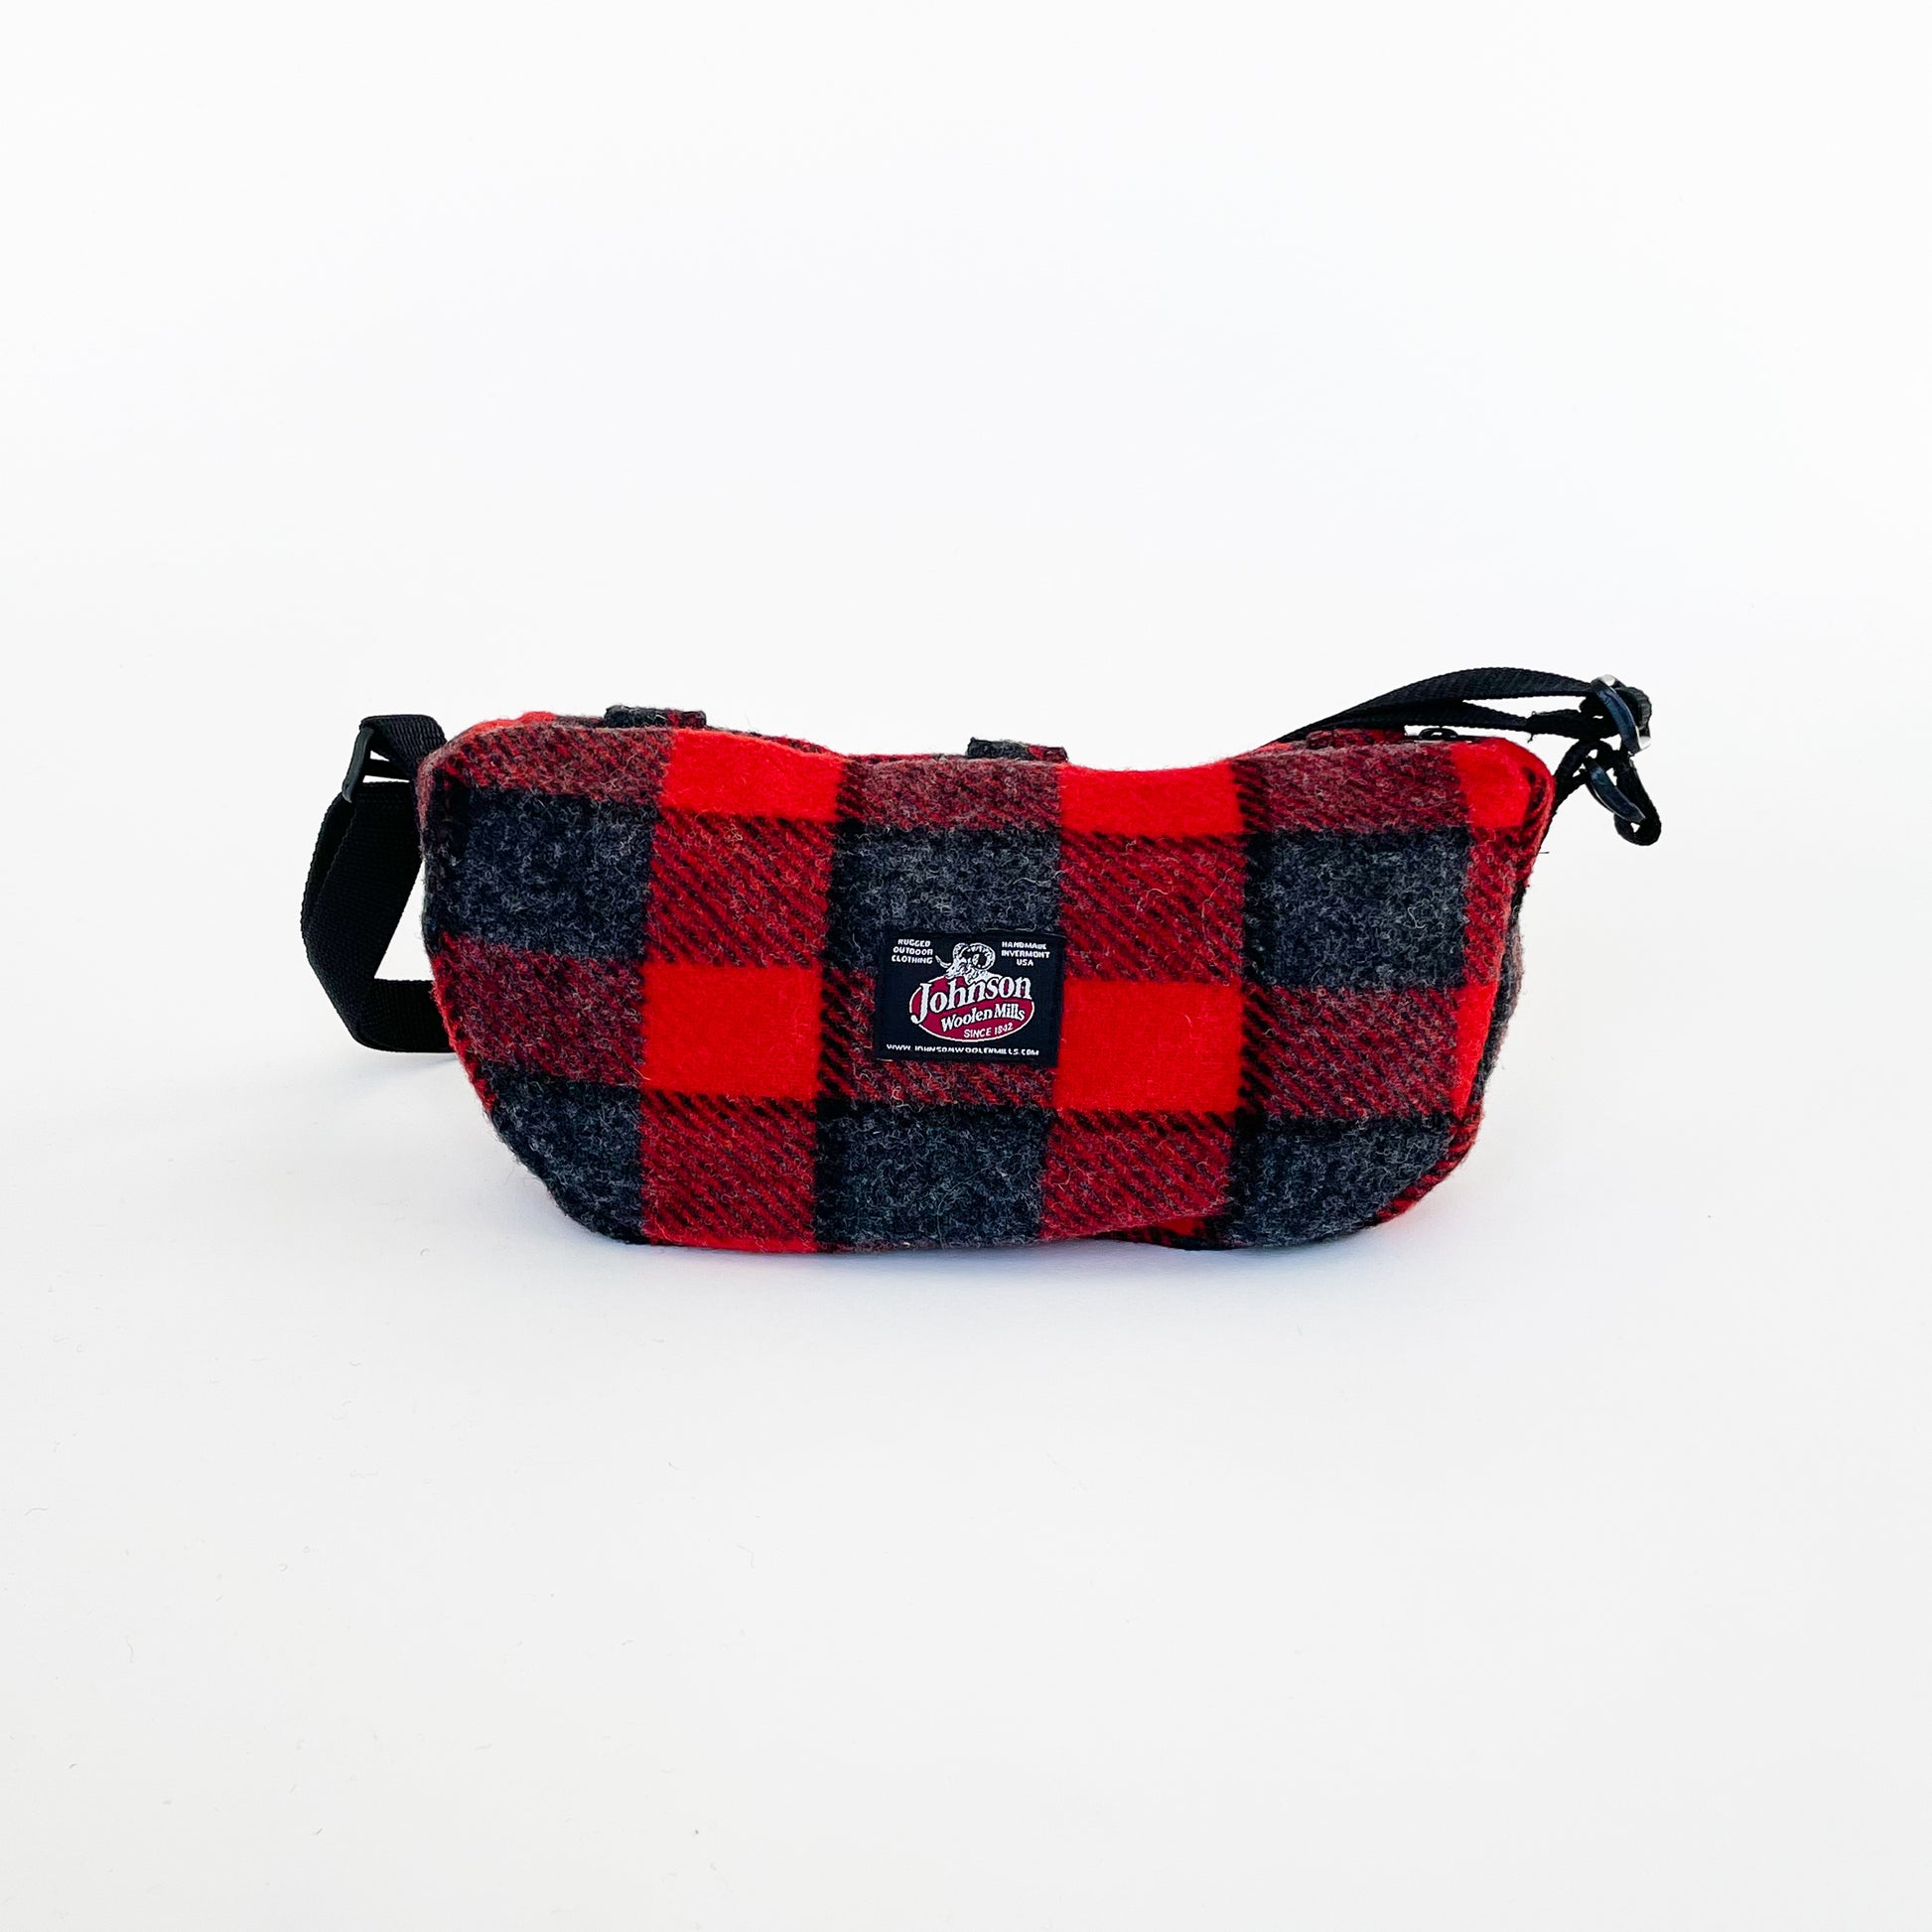 Wool sidewinder bag with strap - bag with zipped closure and belt loops for wearing on your waist plus shoulder strap. Shown in red and gray plaid